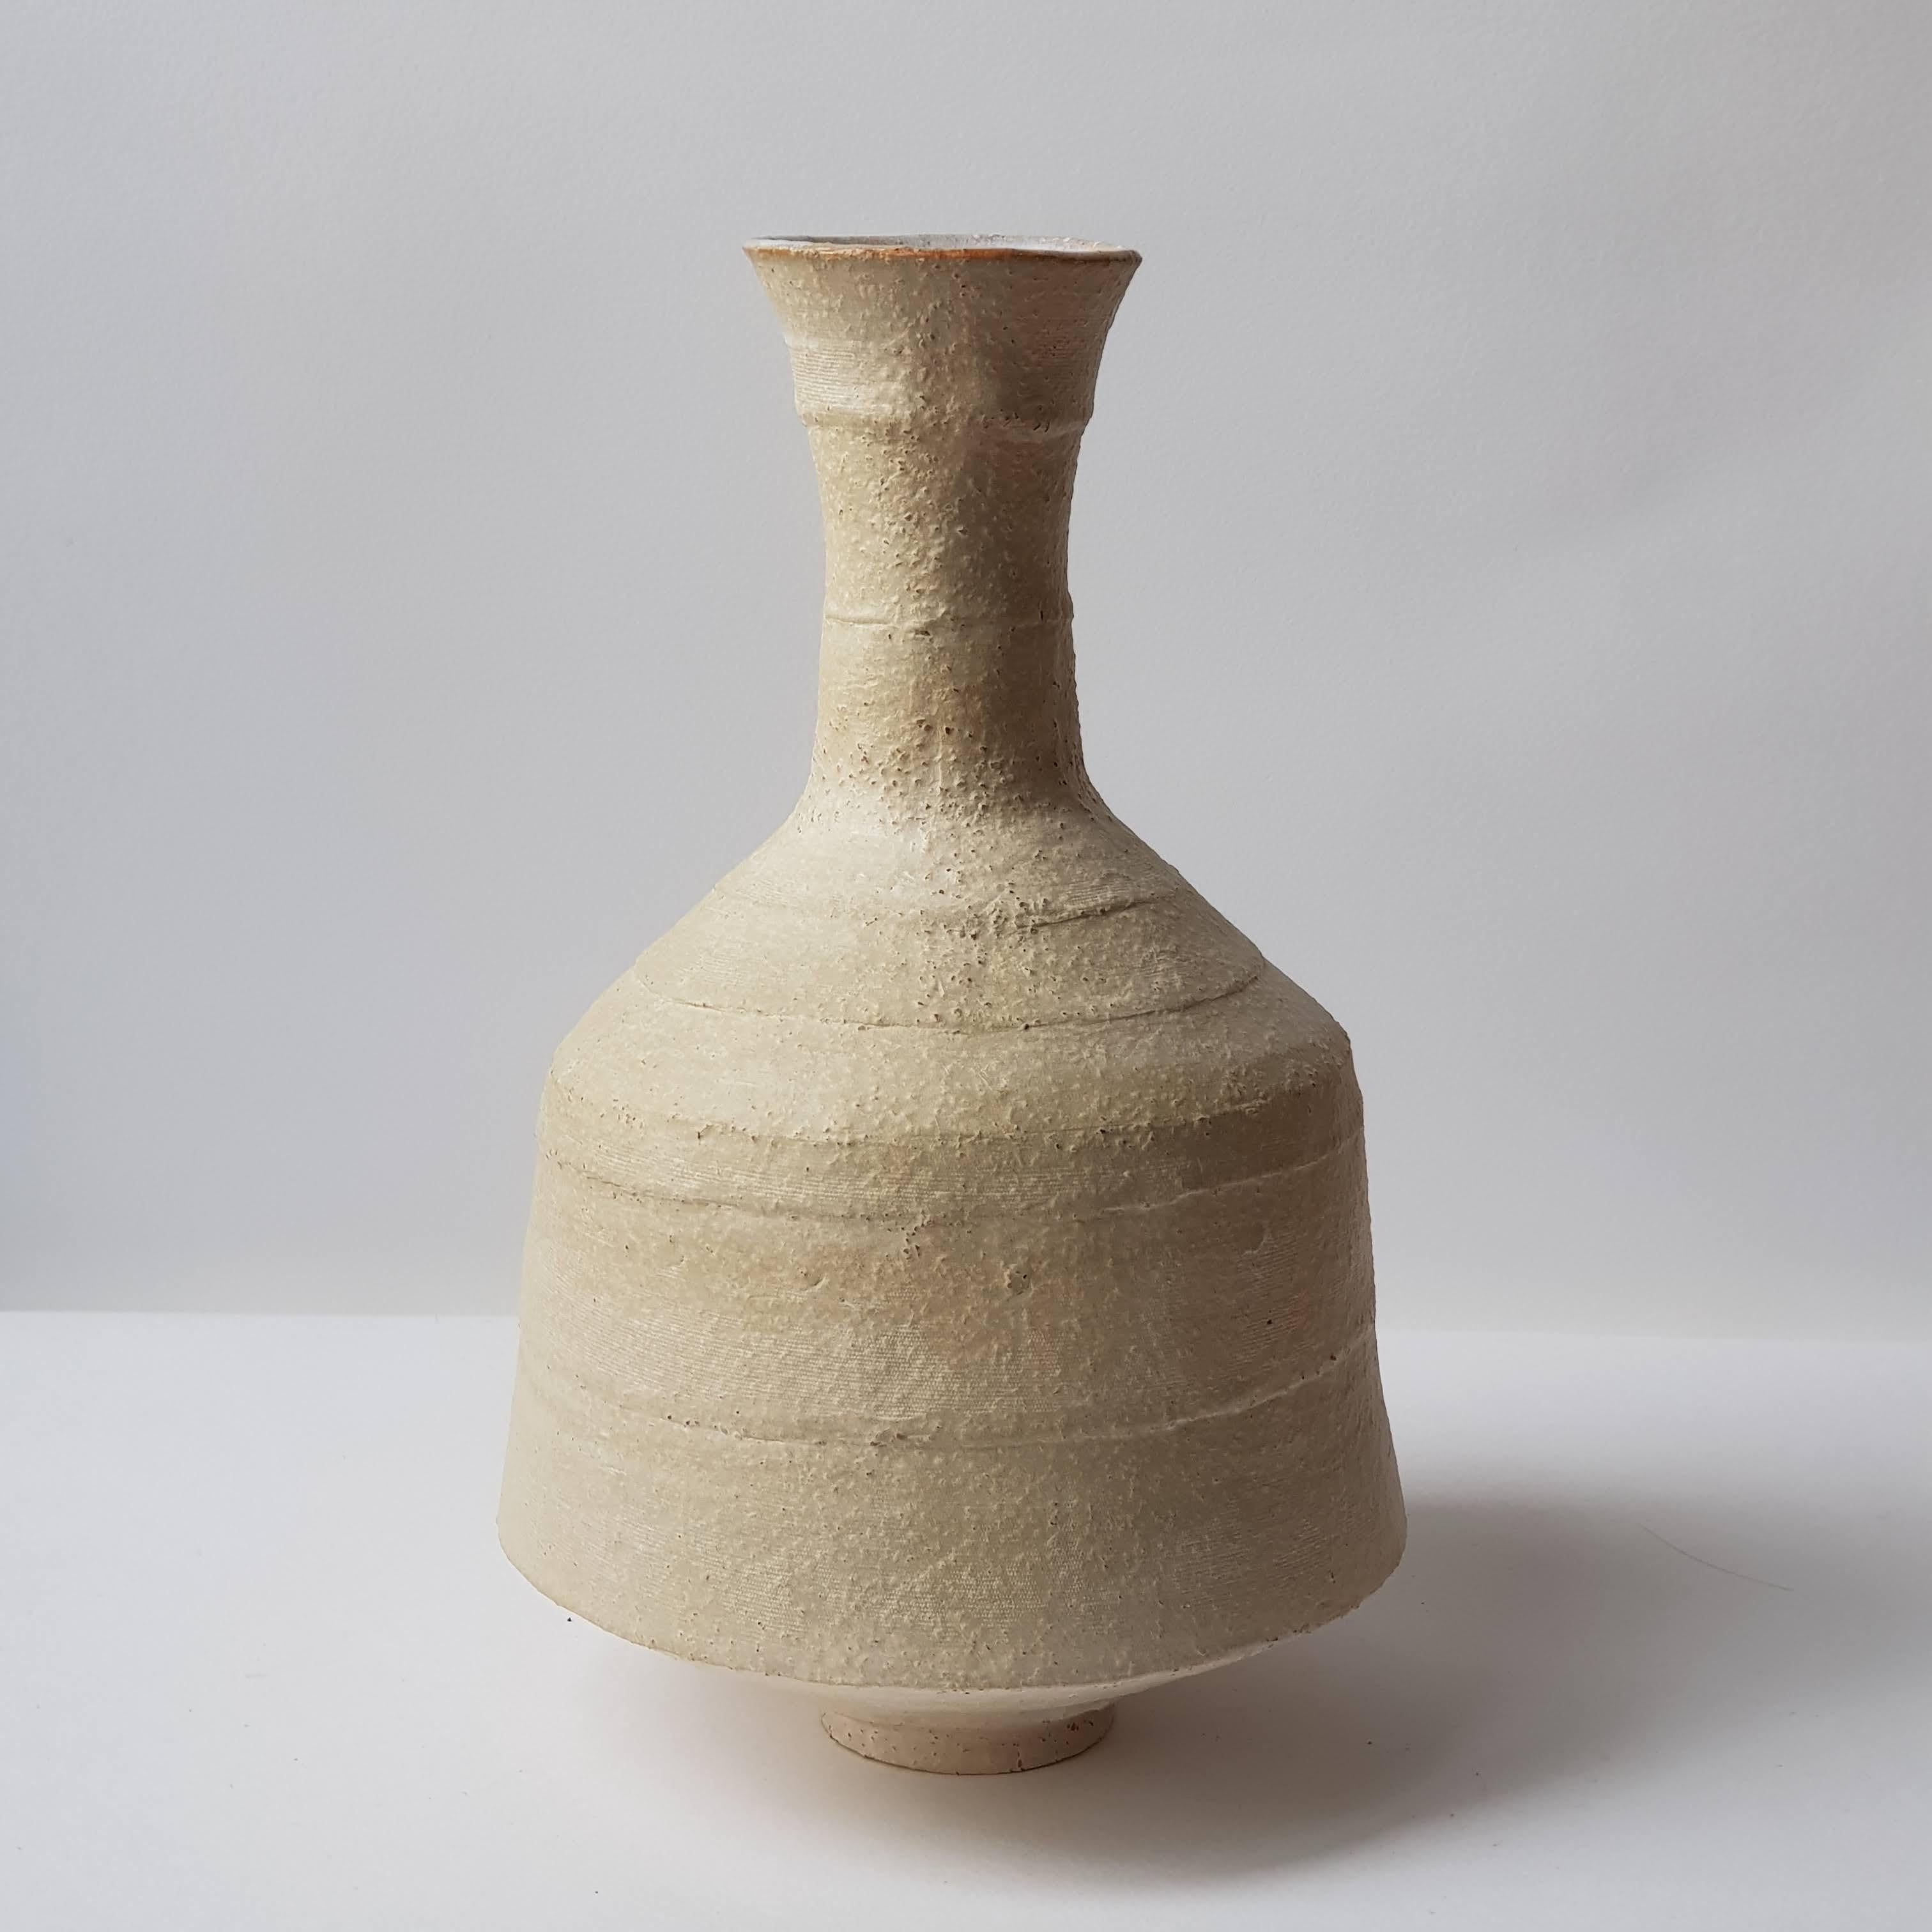 Beige Stoneware Lekythos Vase by Elena Vasilantonaki
Unique
Dimensions: ⌀ 17 x H 26 cm (Dimensions may vary)
Materials: Stoneware
Available finishes: Black, Beige , Brown, Red, Terracotta, White Patina

Growing up in Greece I was surrounded by